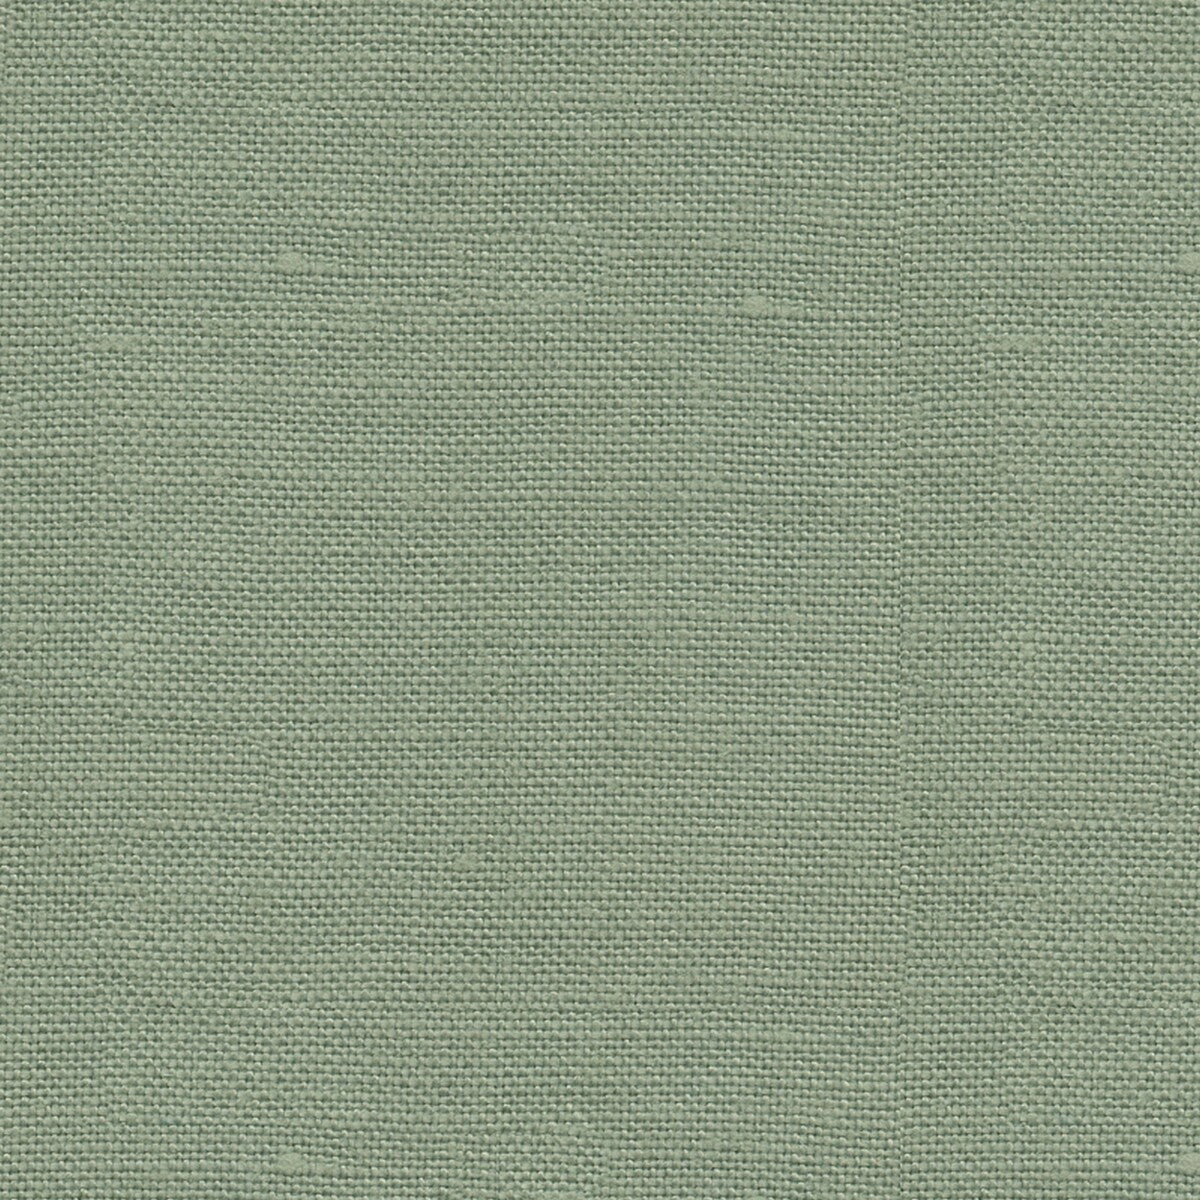 Lea fabric in celadon color - pattern J0337.770.0 - by G P &amp; J Baker in the Crayford collection